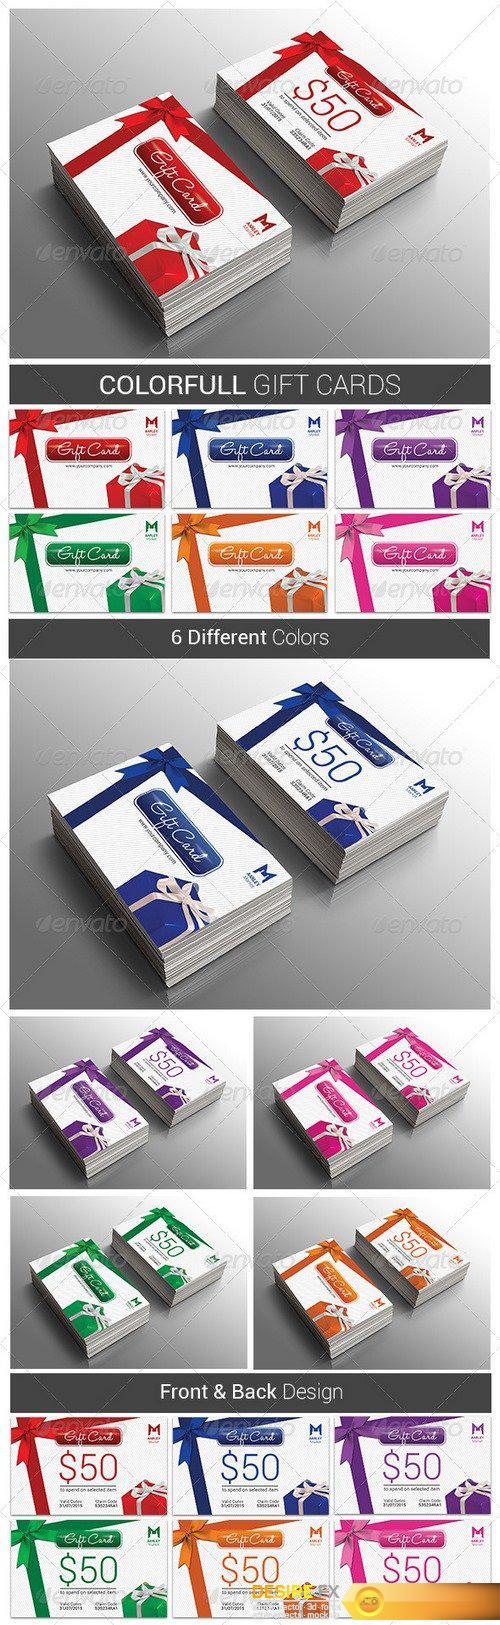 Graphicriver - Colorfull Gift Cards 8609328